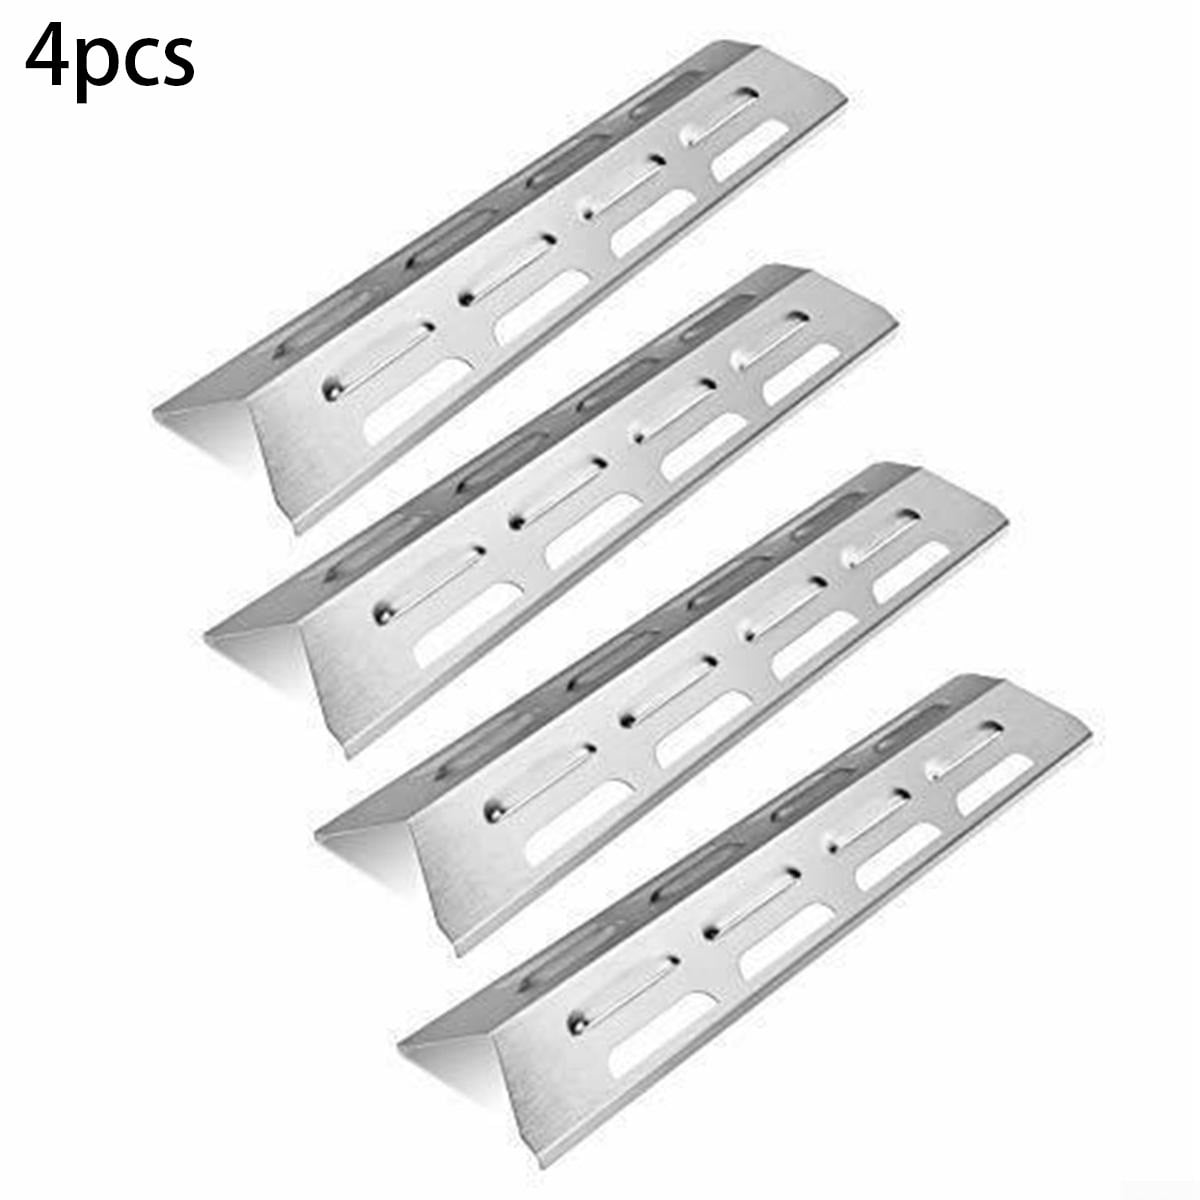 14 9/16" x 3 3/8" Details about   BBQ funland Porcelain Steel Heat Plate Replacement Parts for 